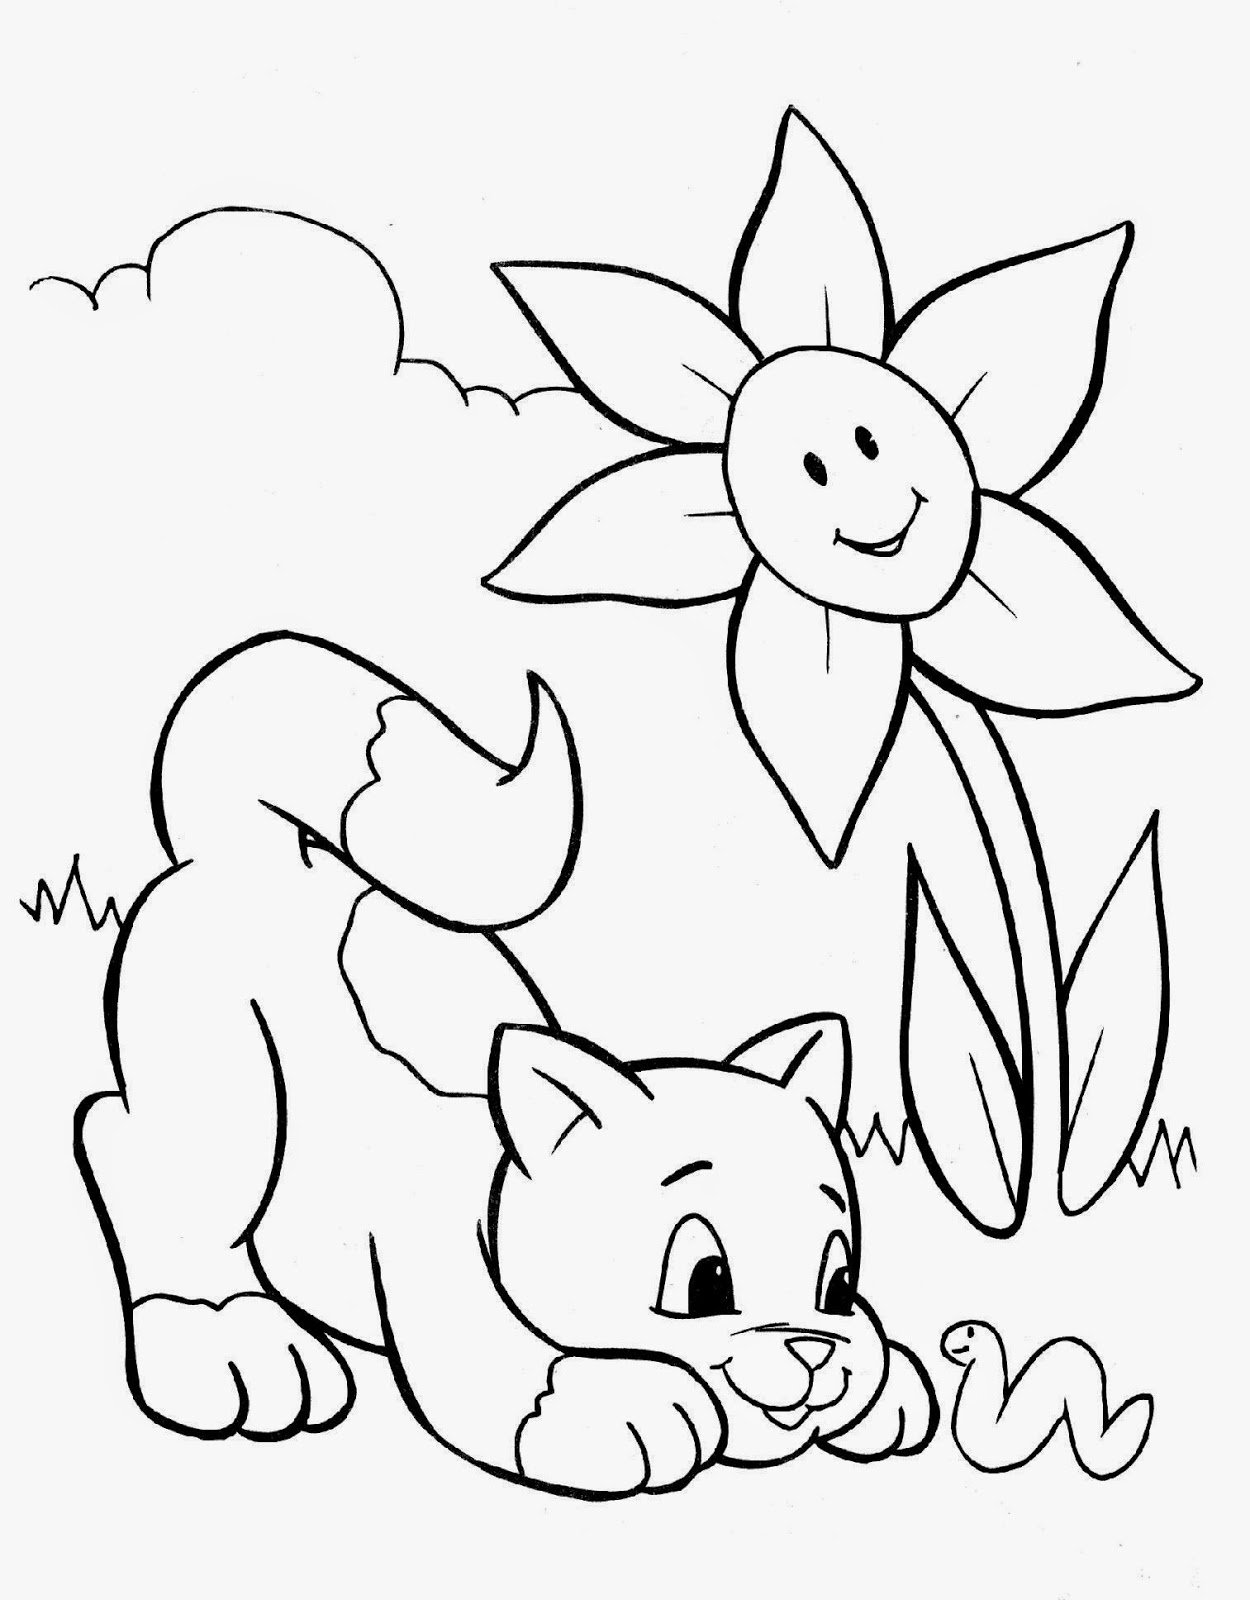 Free Coloring Pages: Online Coloring Book Pages Coloring Online For